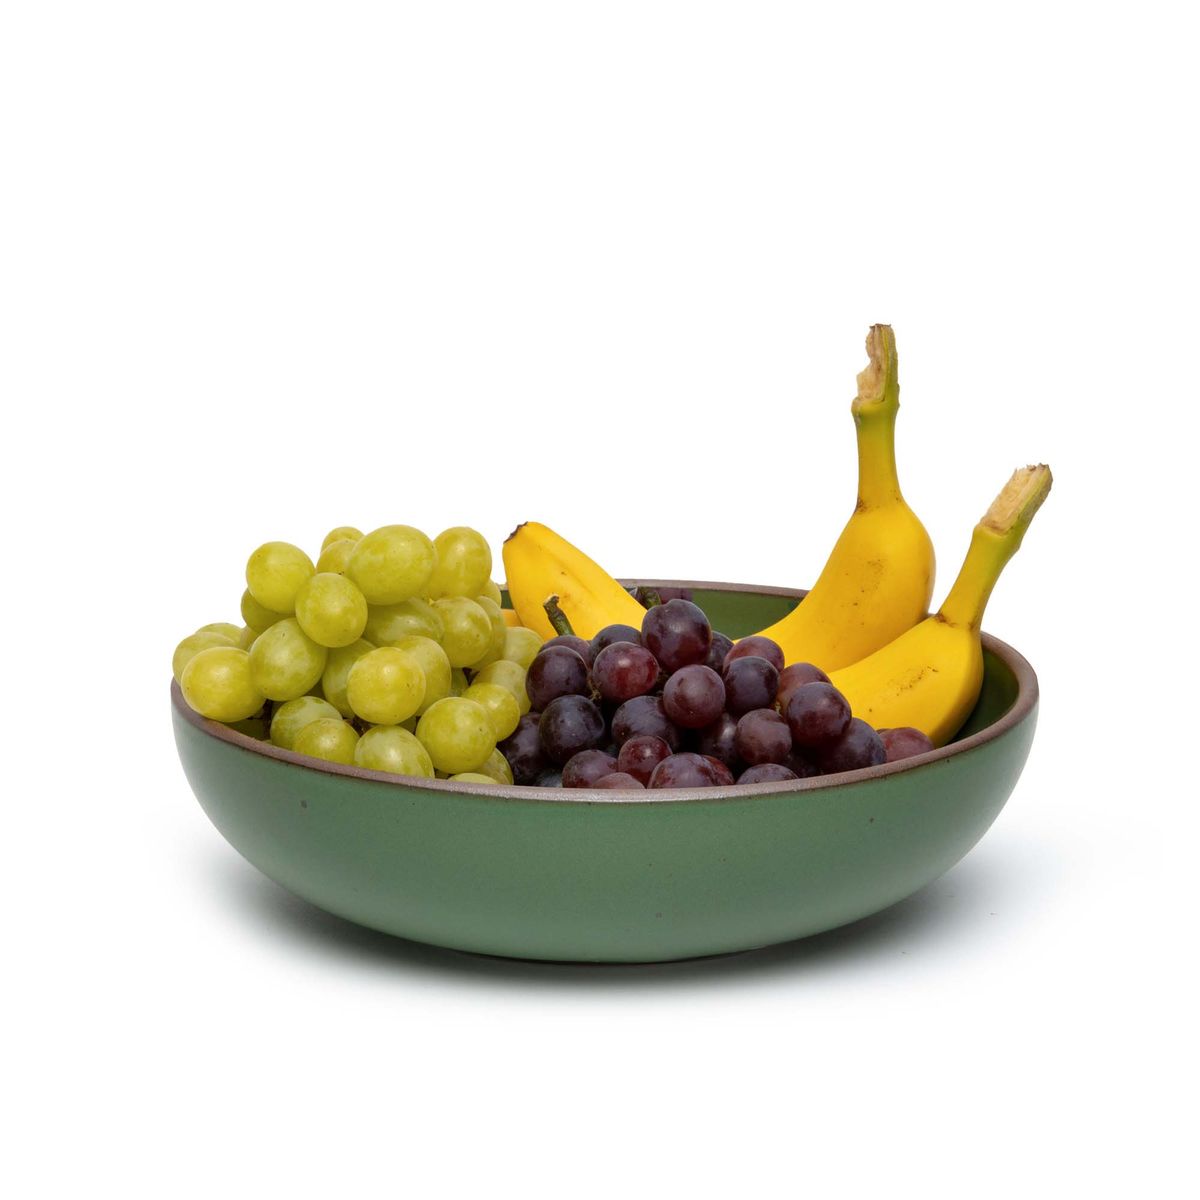 Fruit in a large shallow serving ceramic bowl in a deep, verdant green color featuring iron speckles and an unglazed rim.